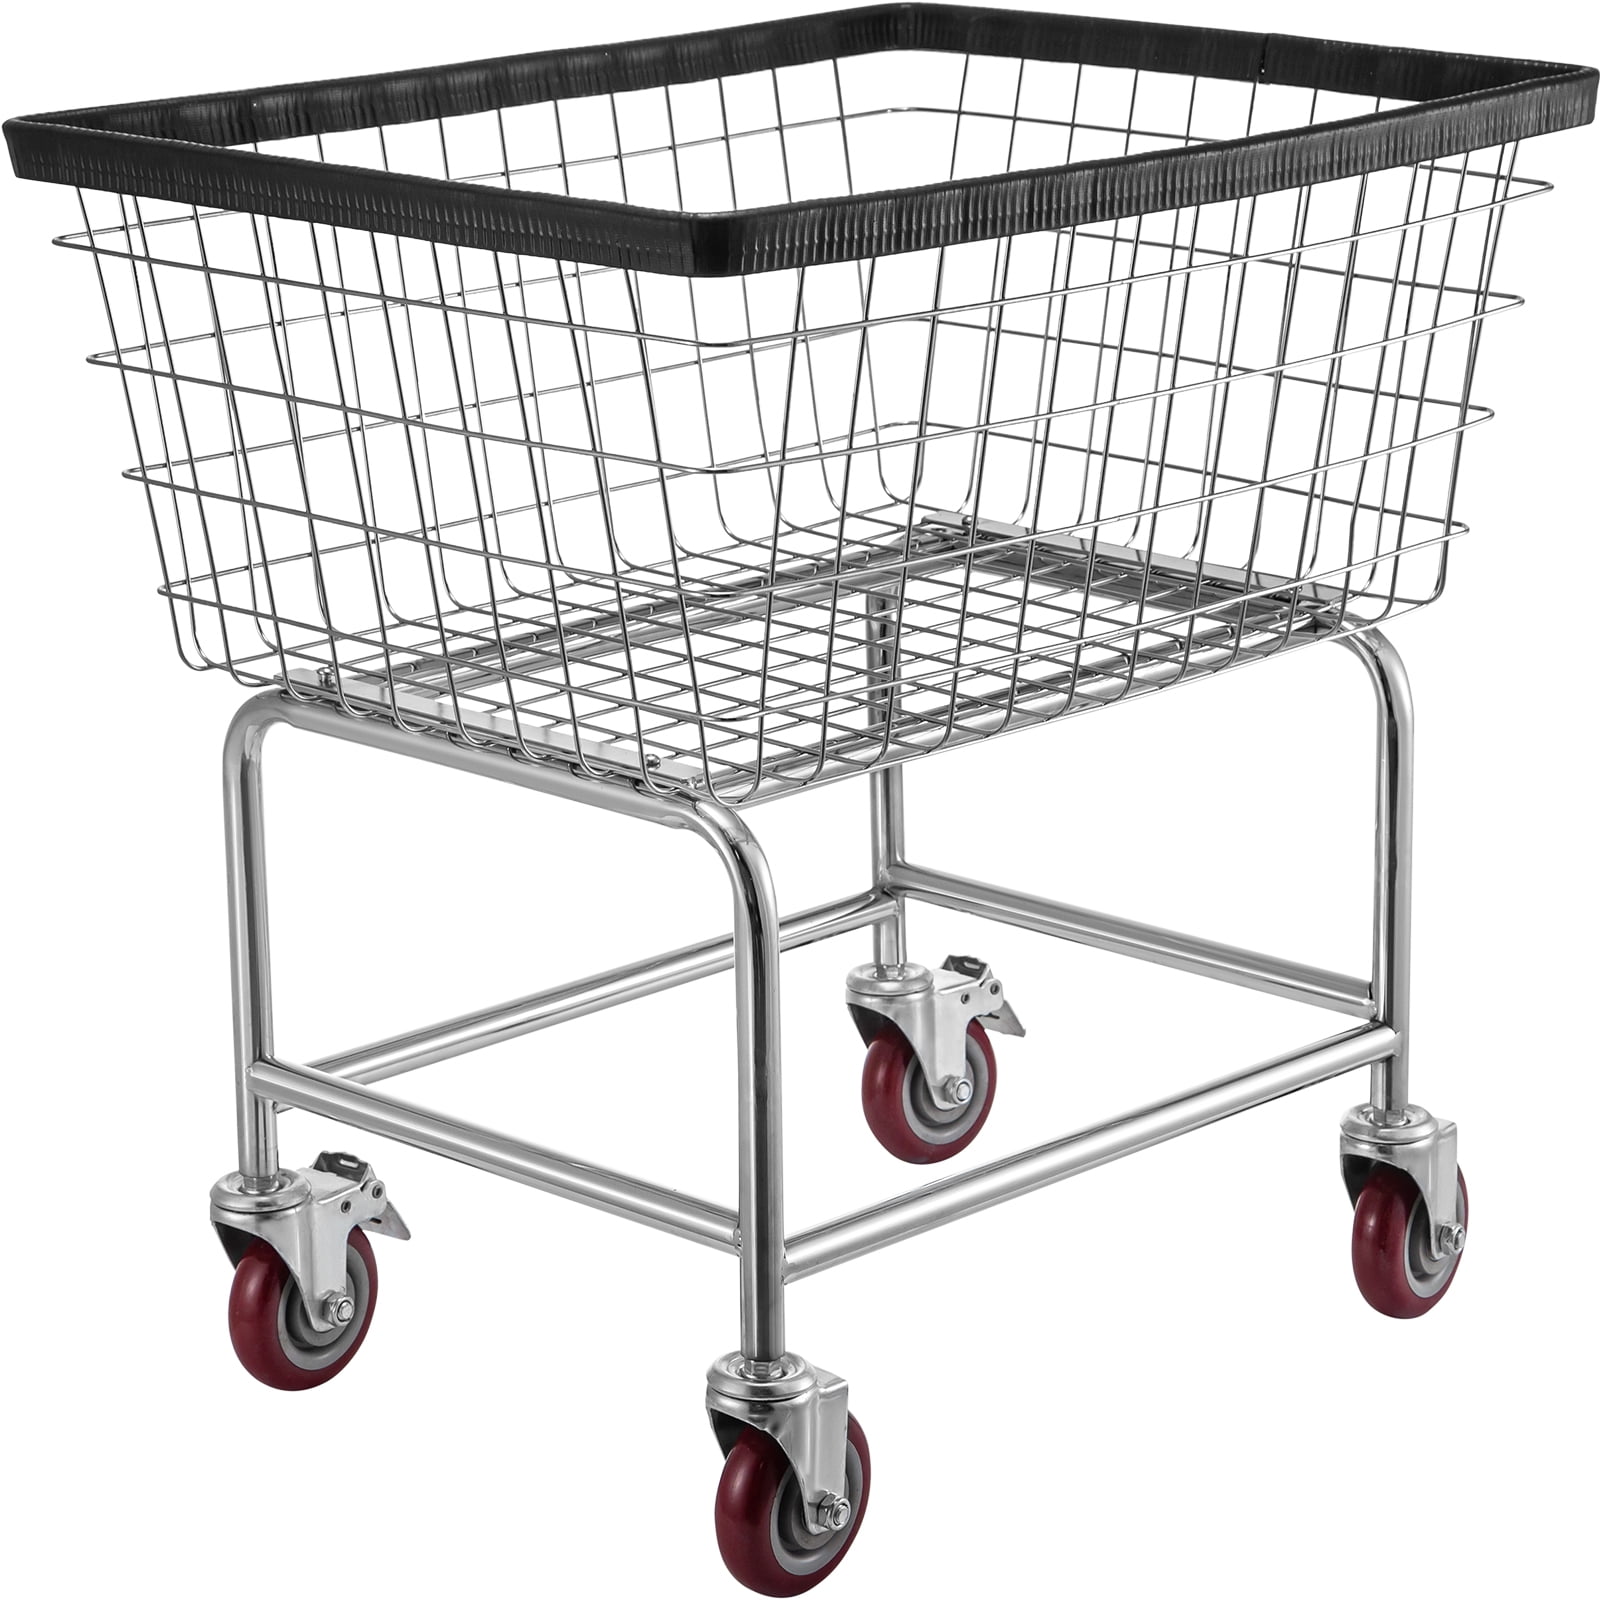 ANTI-MICROBIAL COMMERCIAL HEAVY DUTY WIRE LAUNDRY BASKET CART NEW! 